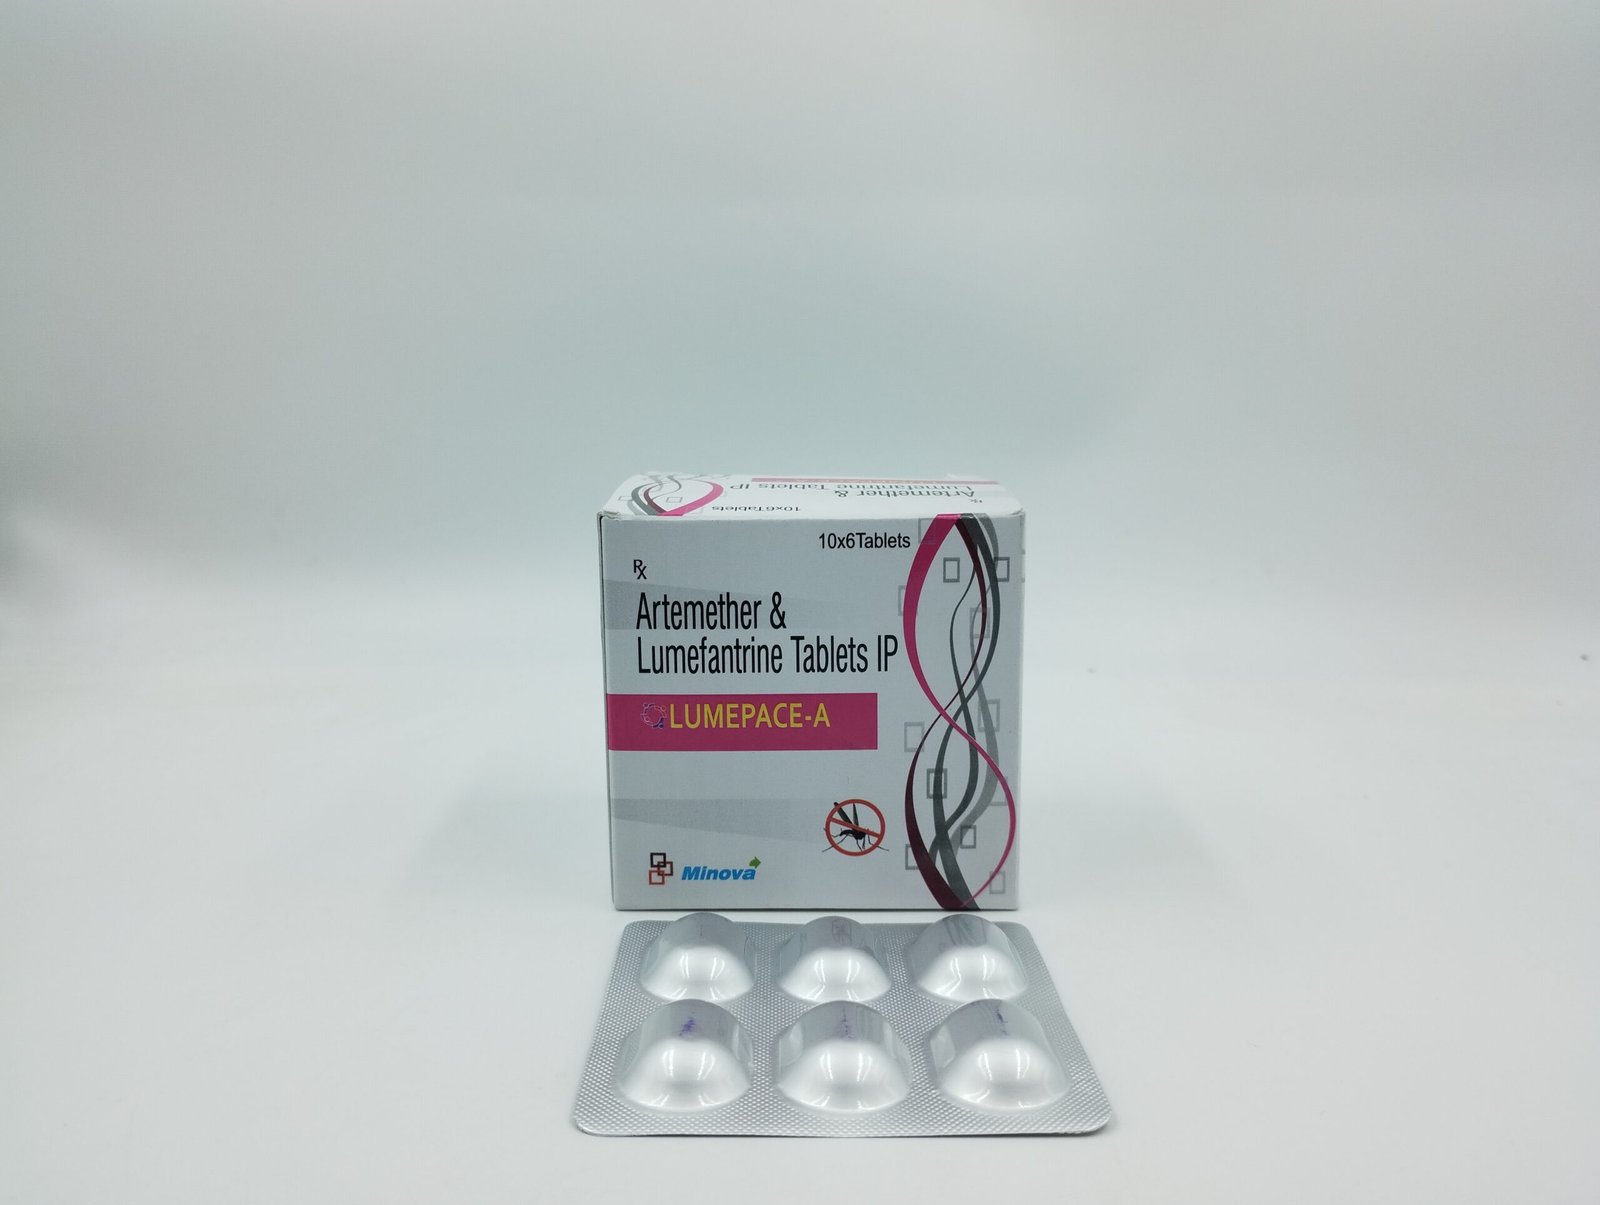 Lumepace-A Tablets